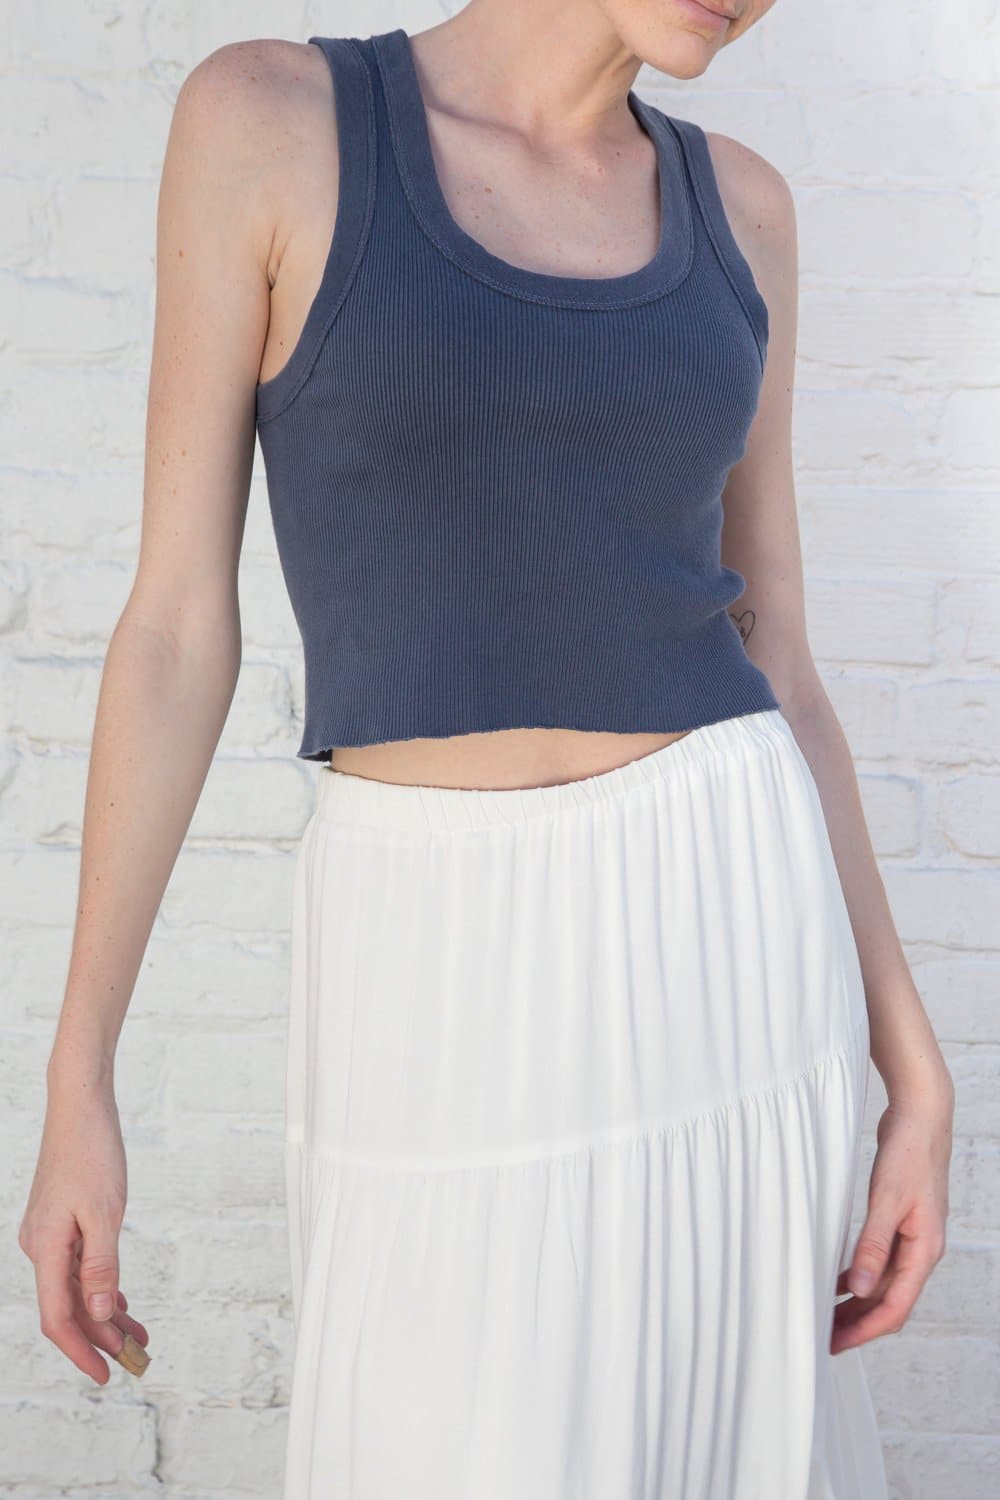 Brandy Melville Brown Connor Tank Top Size undefined - $8 - From